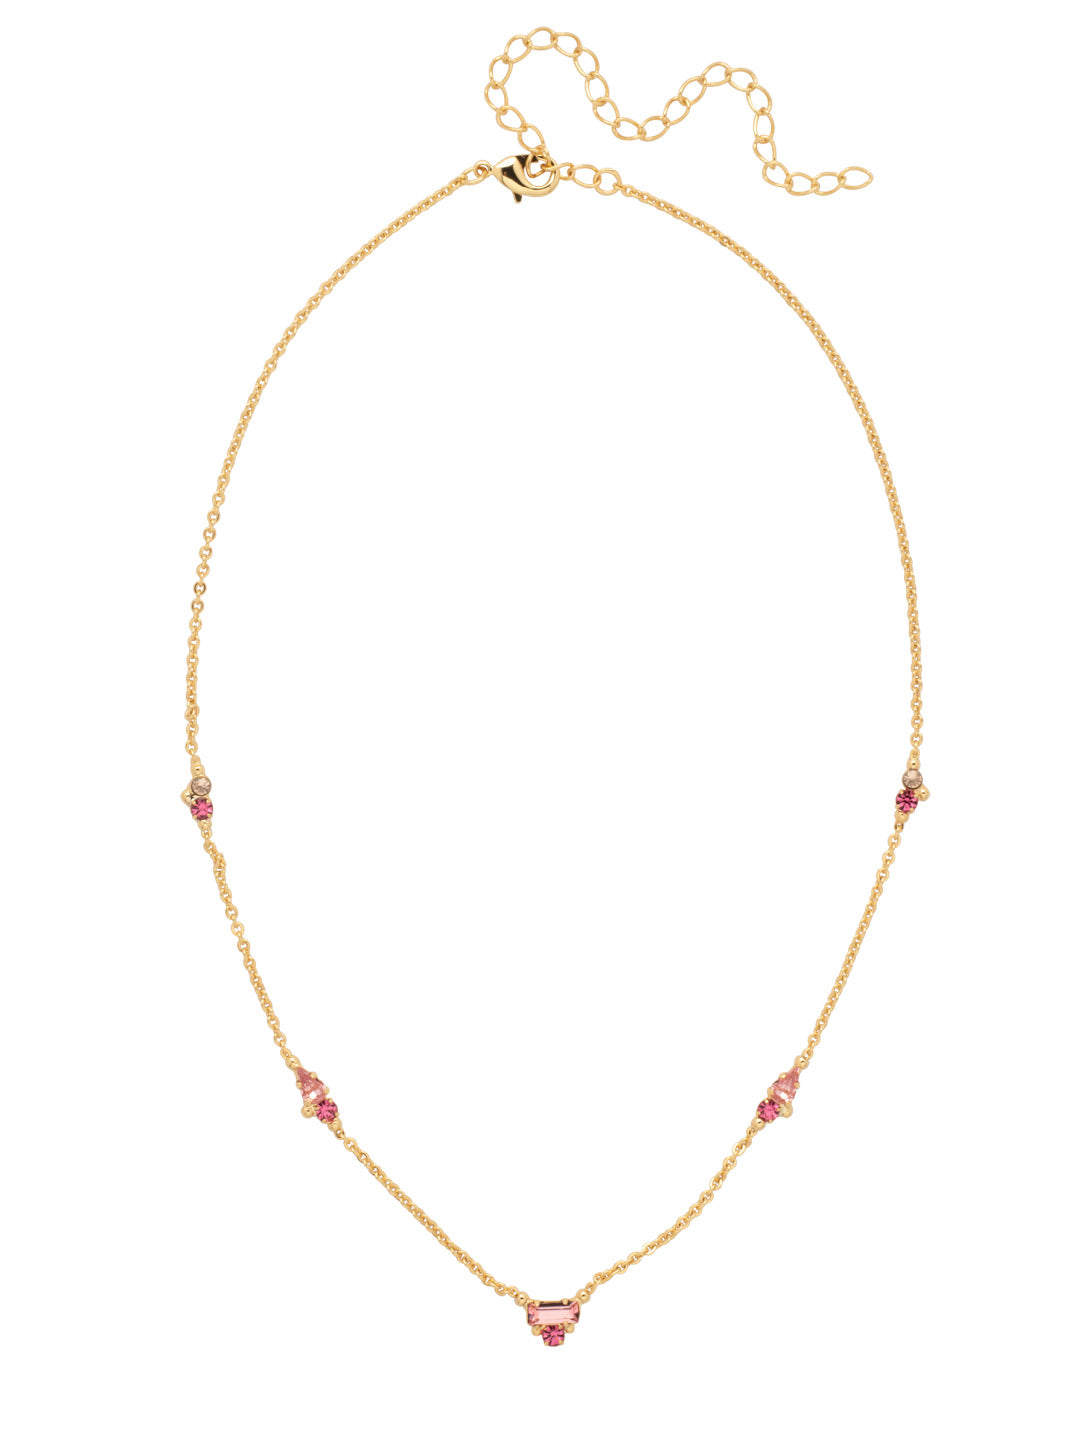 Mini Embellished Tennis Necklace - NFN11BGBFL - <p>The Mini Embellished Tennis Necklace features various cut crystals clustered at various points of an adjustable chain, secured with a lobster claw clasp. From Sorrelli's Big Flirt collection in our Bright Gold-tone finish.</p>